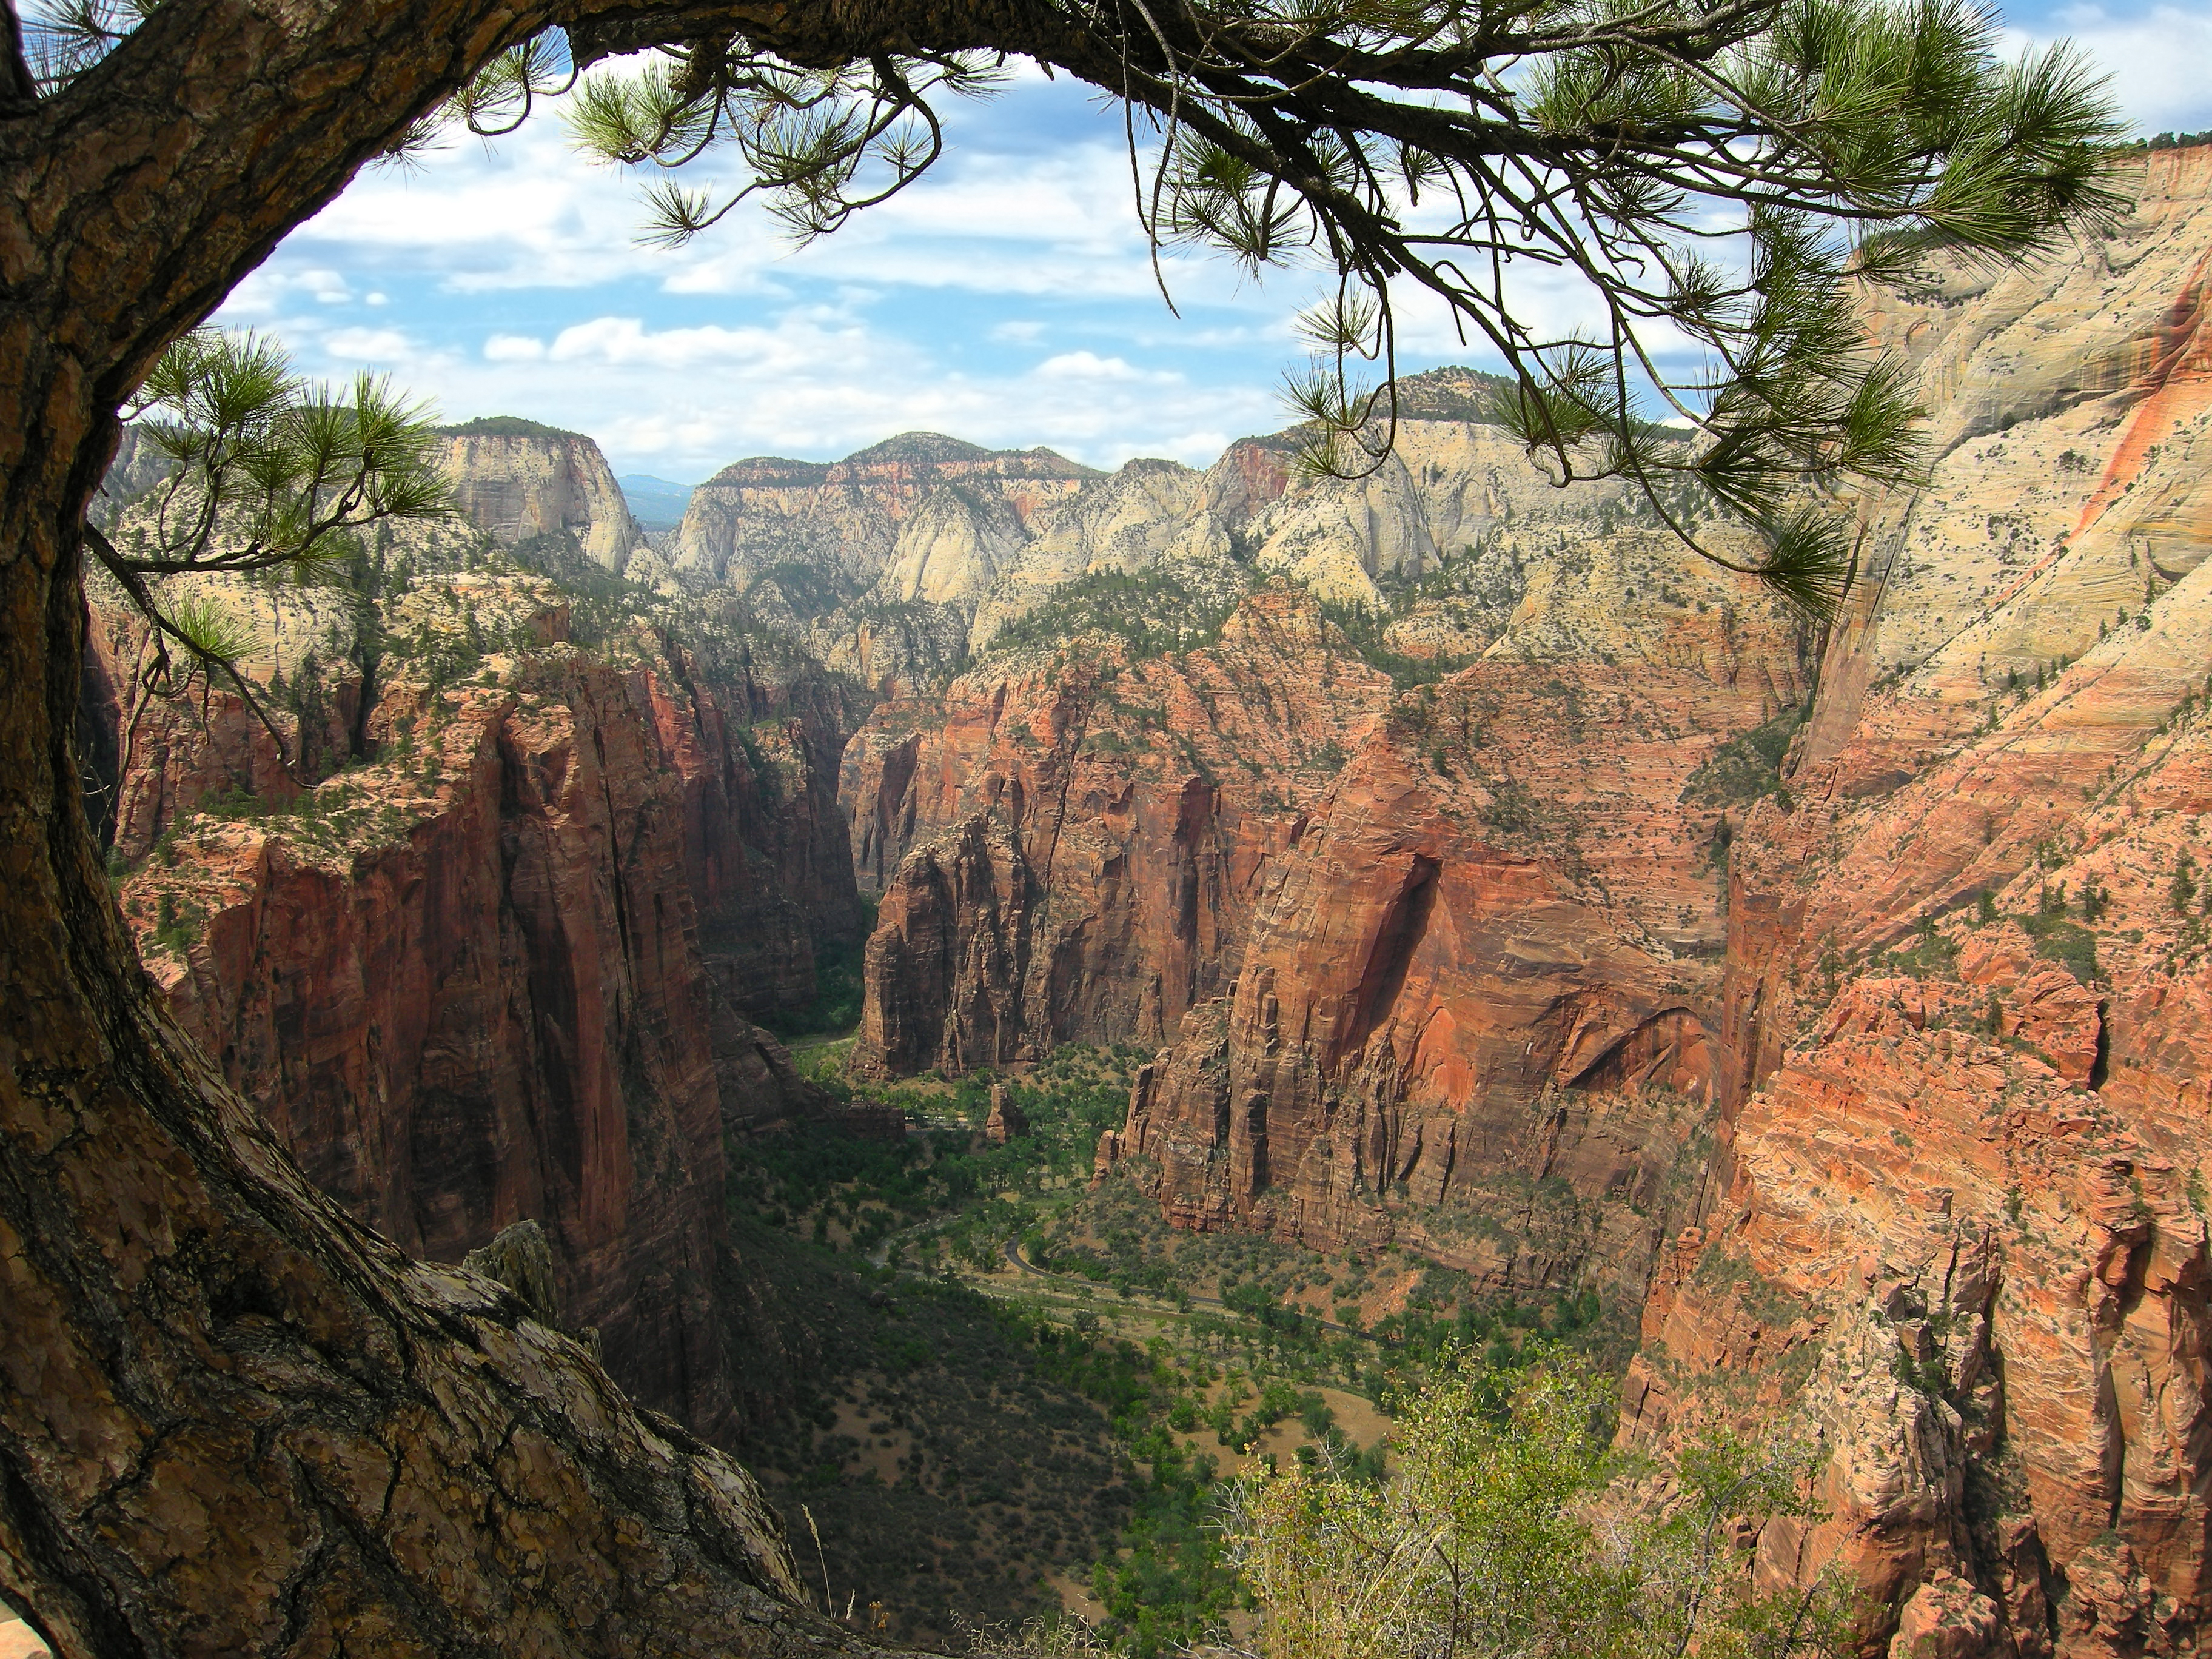 View from Angel's Landing in Zion National Park in Utah